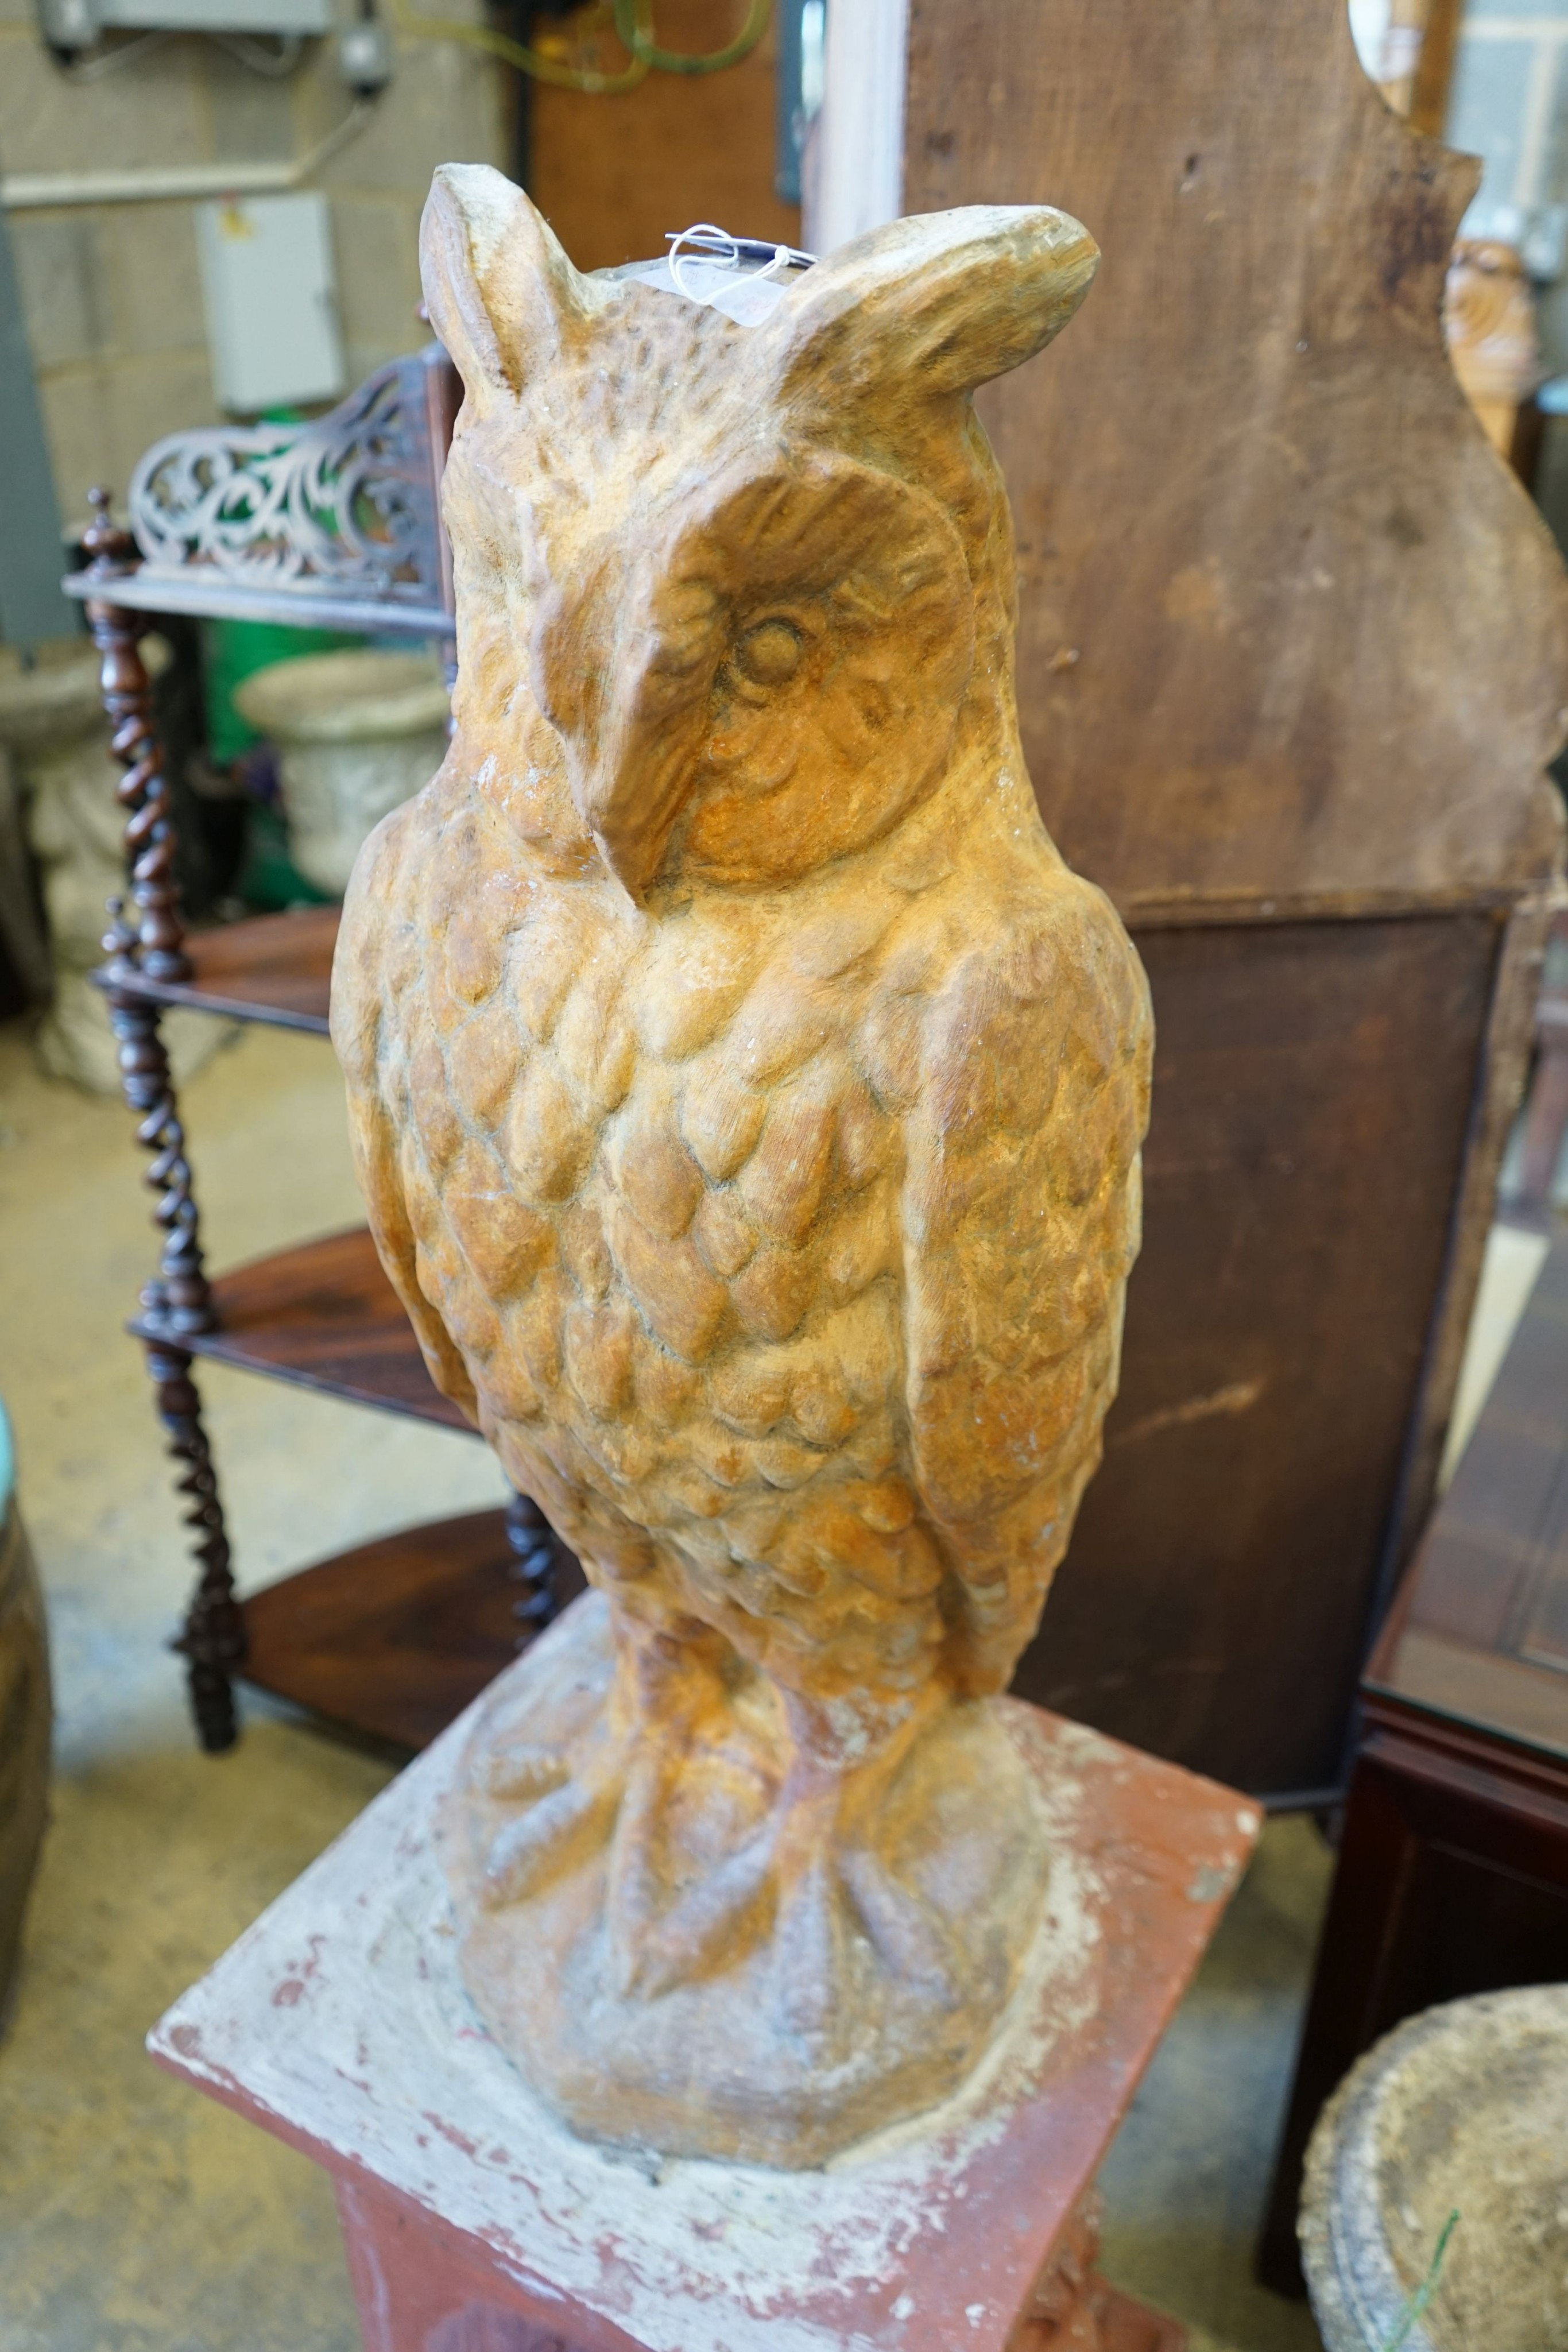 A reconstituted stone owl garden ornament on terracotta plinth, total height 130cm